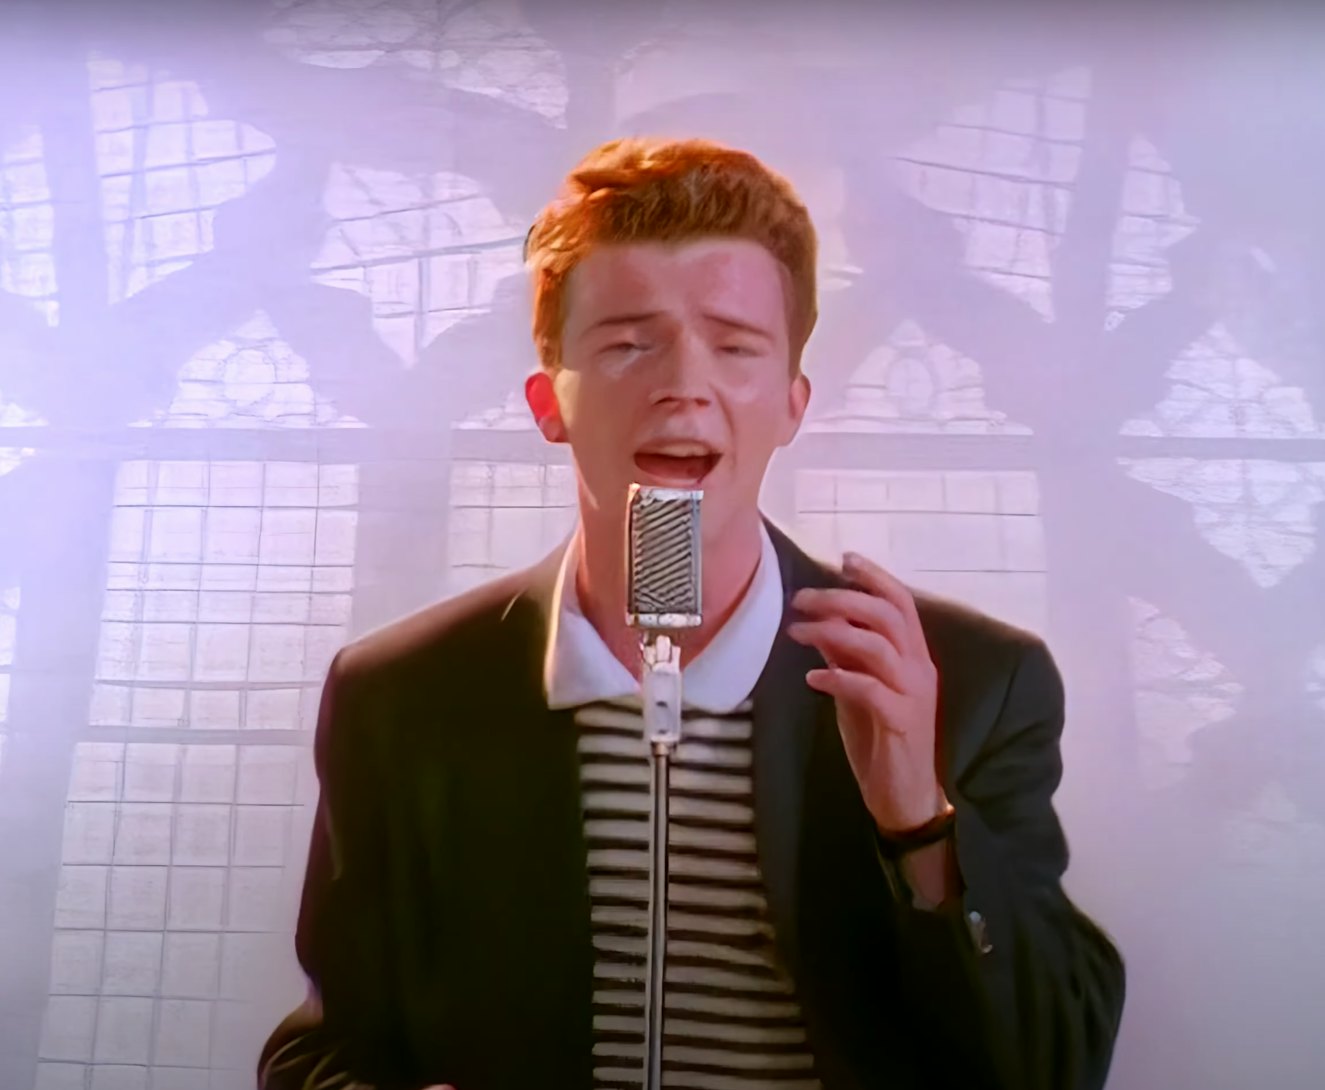 What is RickRolling? A look back at the Rick Astley internet